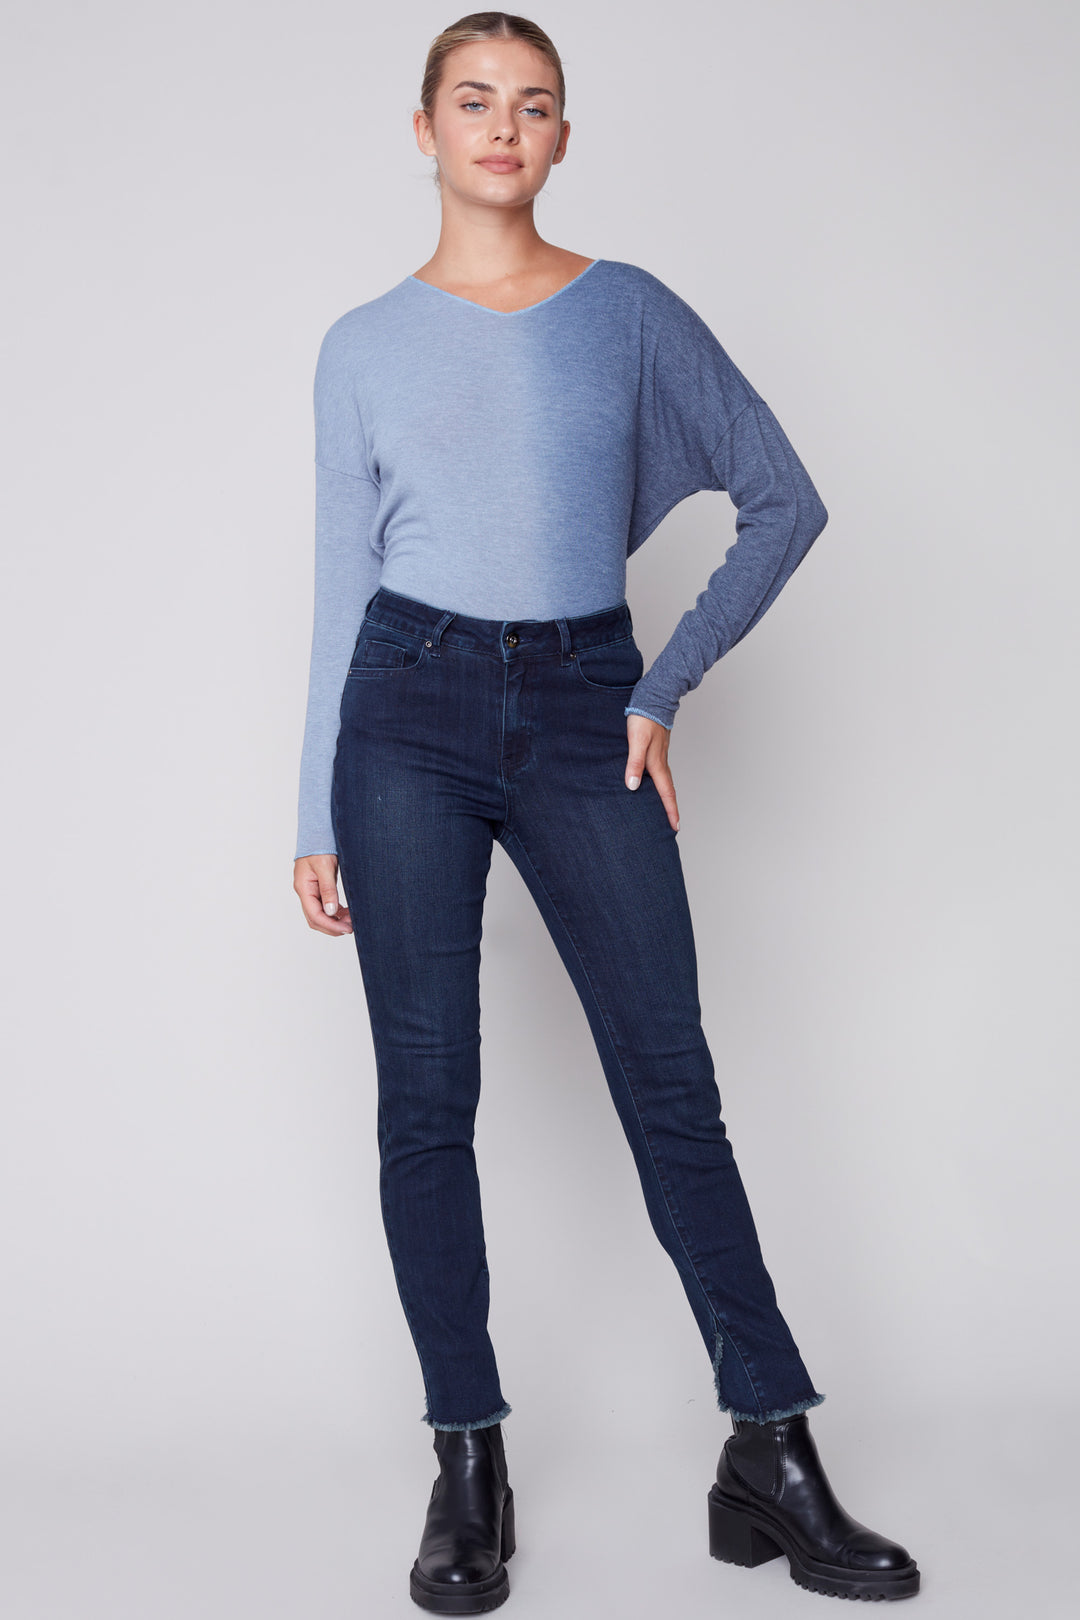 Crafted with a super stretchy denim and a unique tulip hem featuring a frayed, raw edge, these well-fitted ocean deep blue jeans will make a statement with every step!